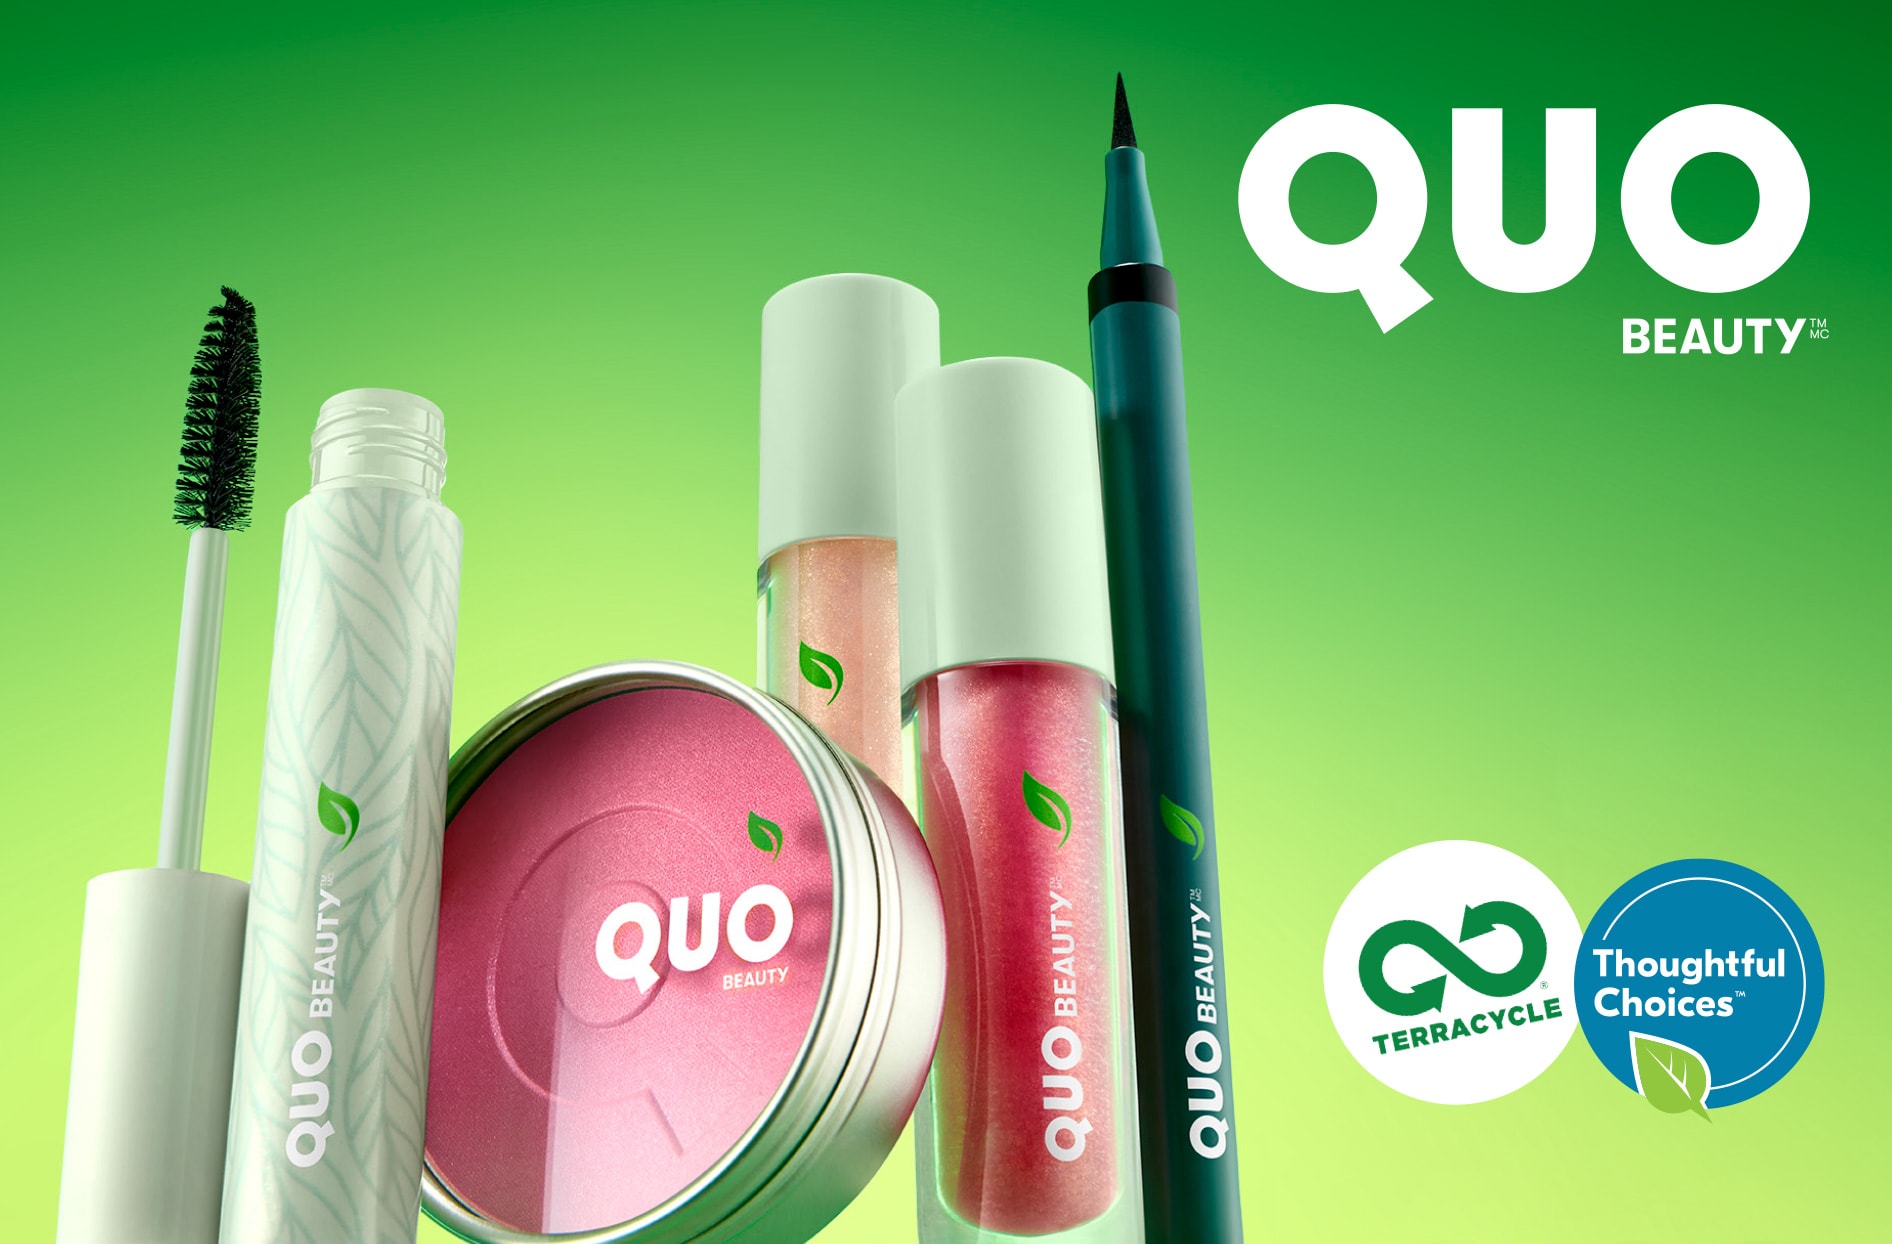 A photo of makeup products featured in Quo Beauty’s “Thoughtful Choices” collection.